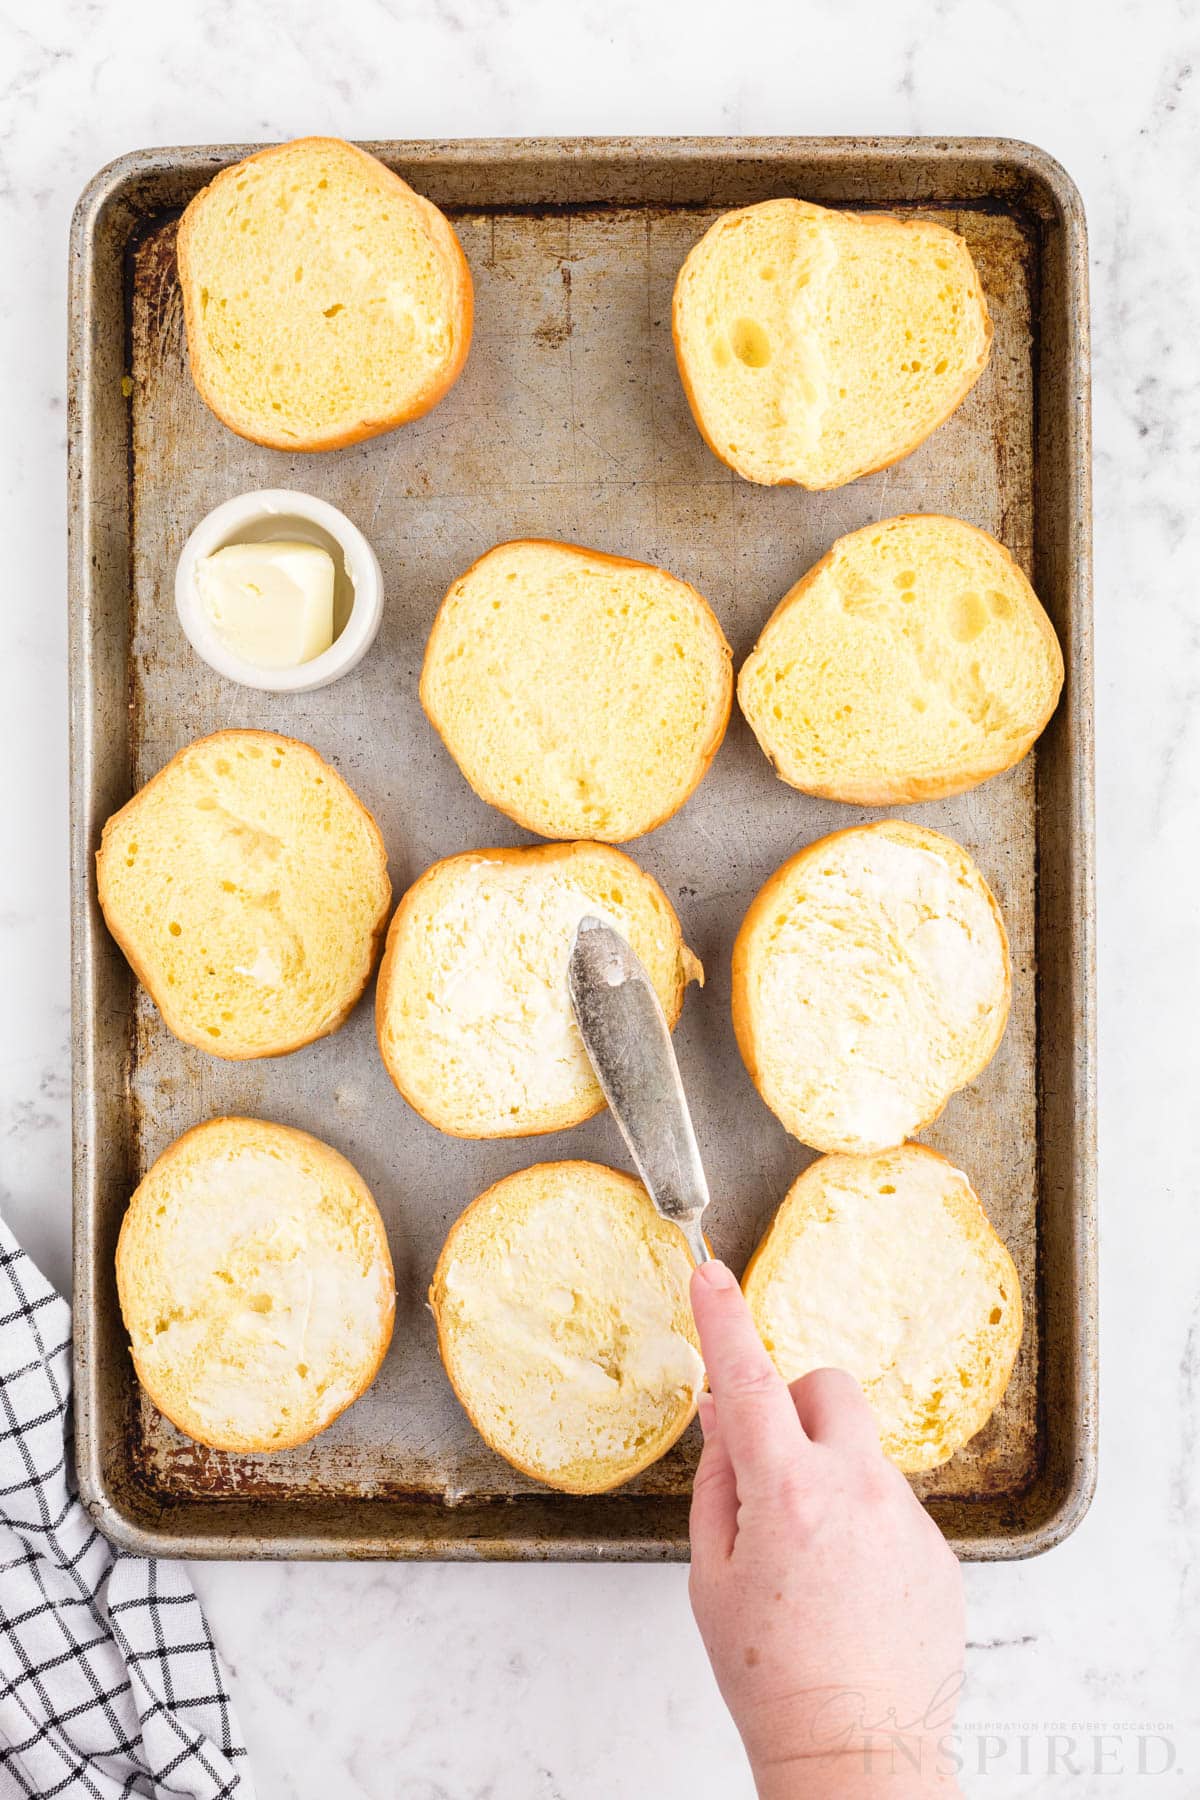 Spreading butter on open burger buns with knife on baking sheet, black and white linen, on a white marble surface.